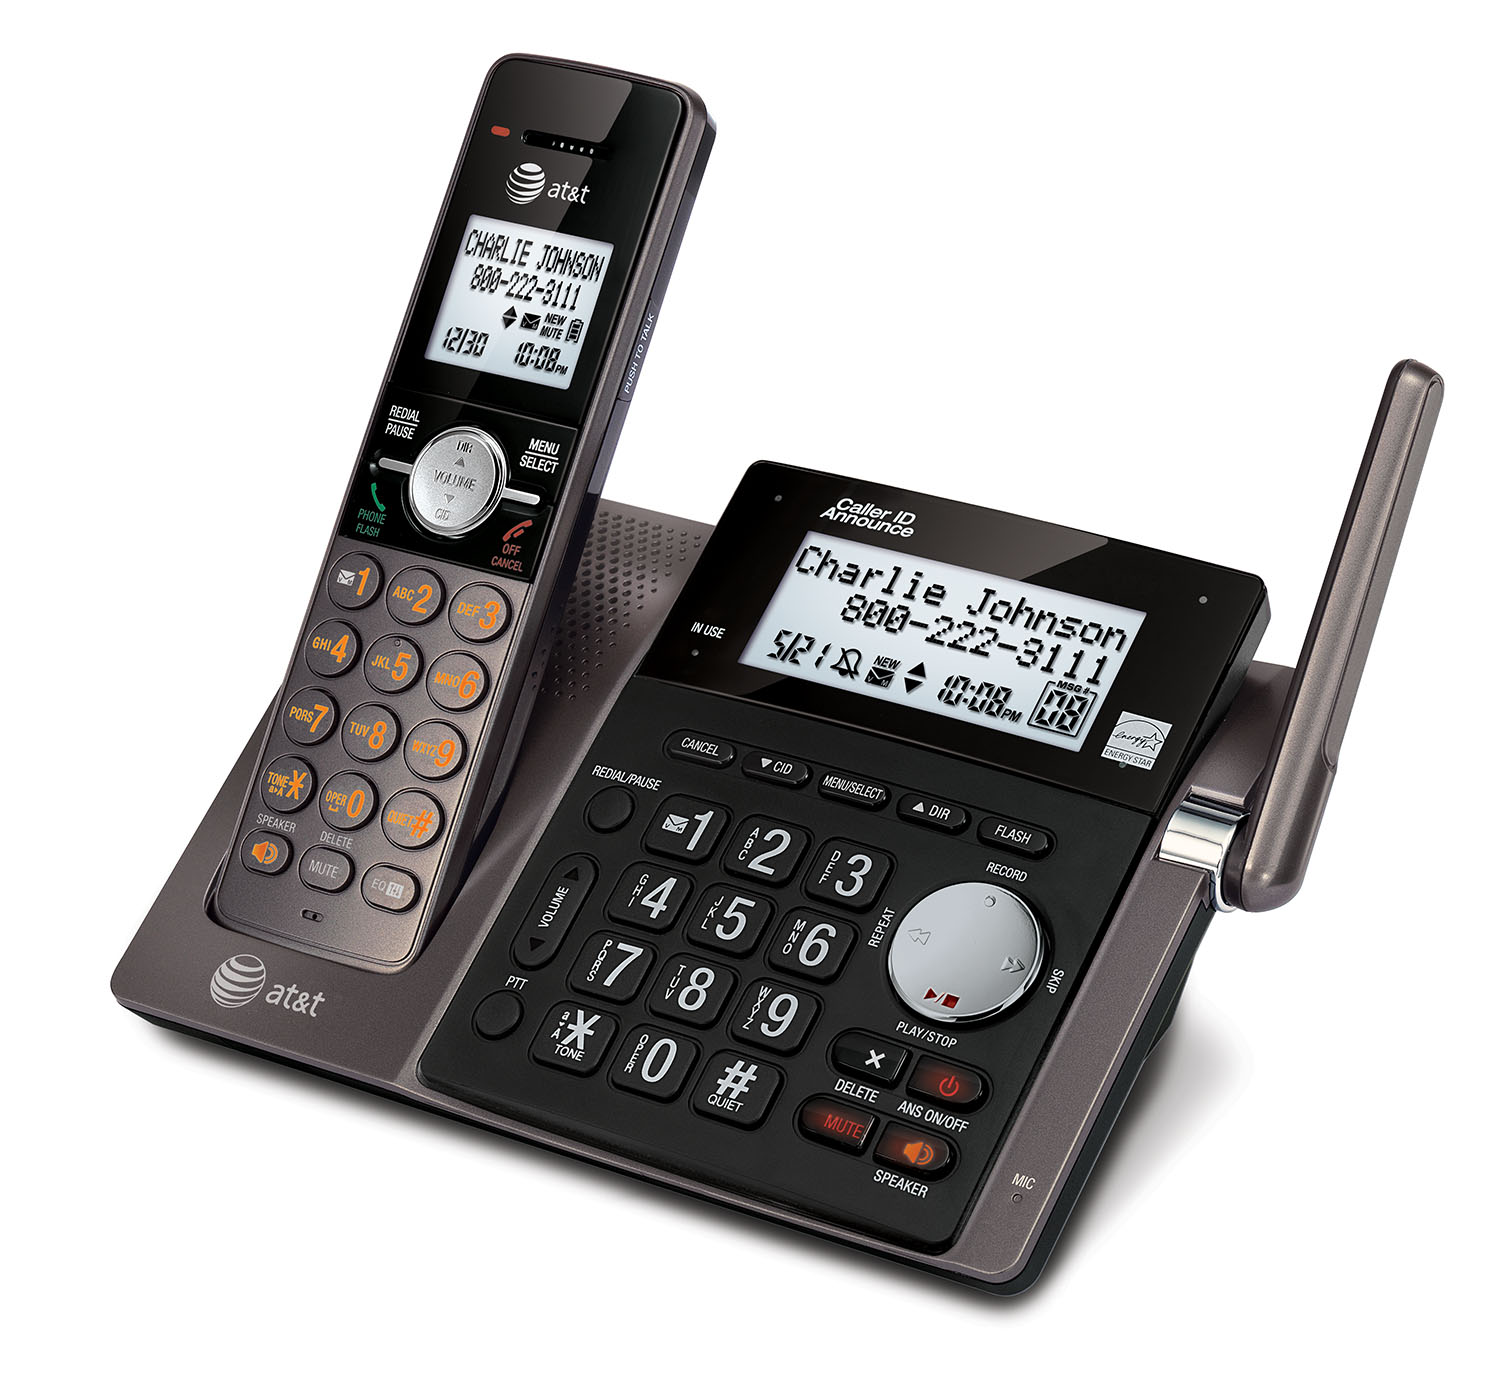 5 handset cordless answering system with caller ID/call waiting - view 3